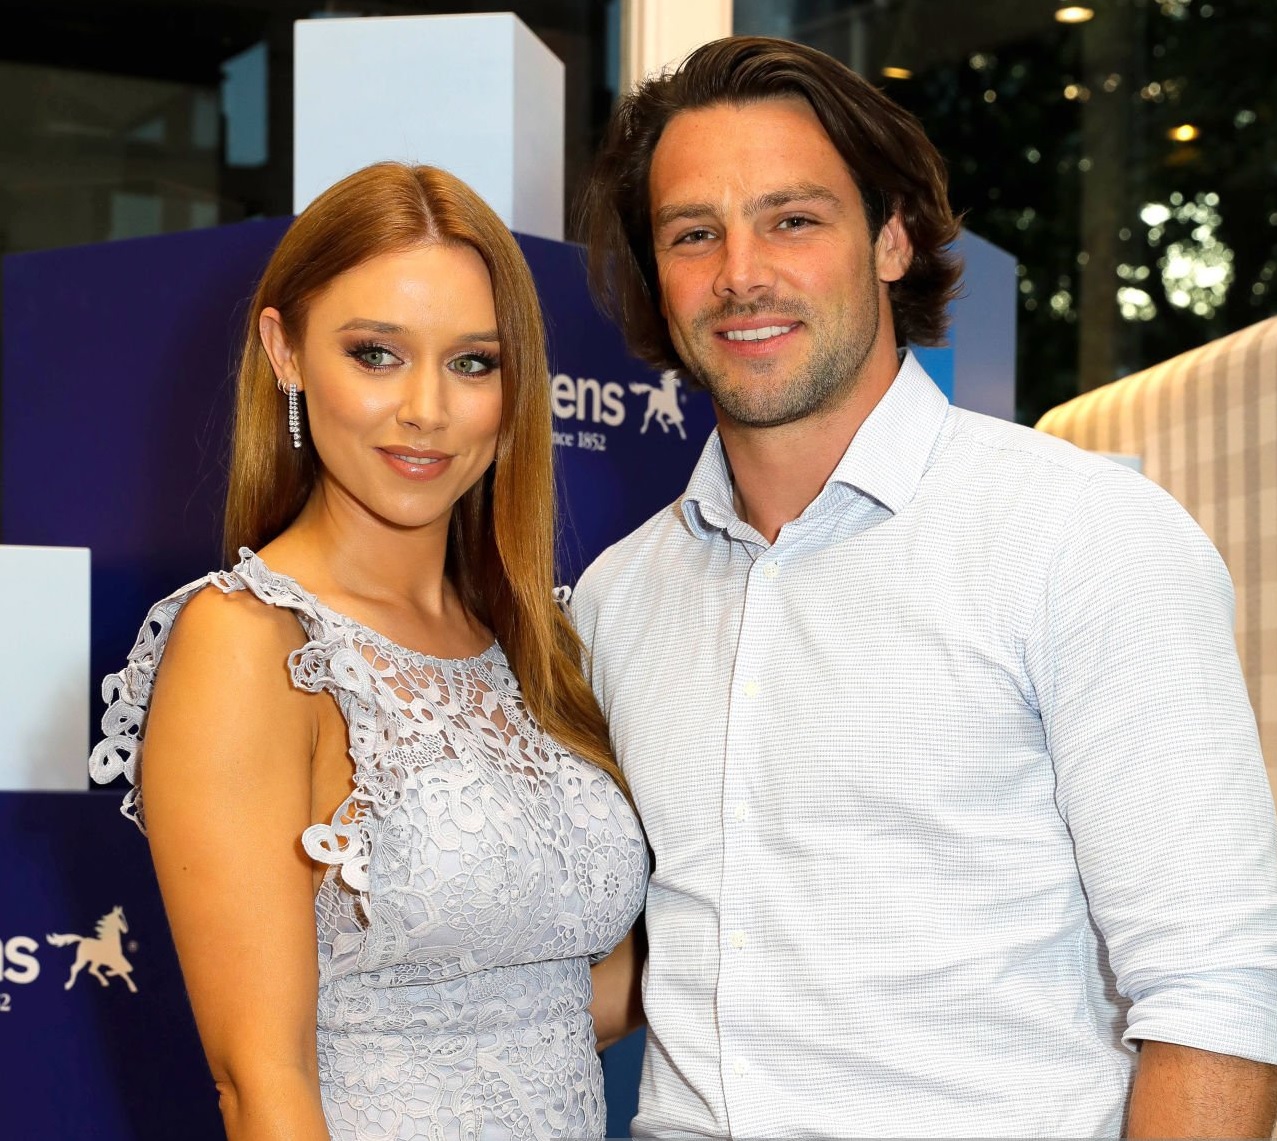 Ben Foden and Una Healy attended the launch party for Hastens Appaloosa & The Marwari Beds in 2017